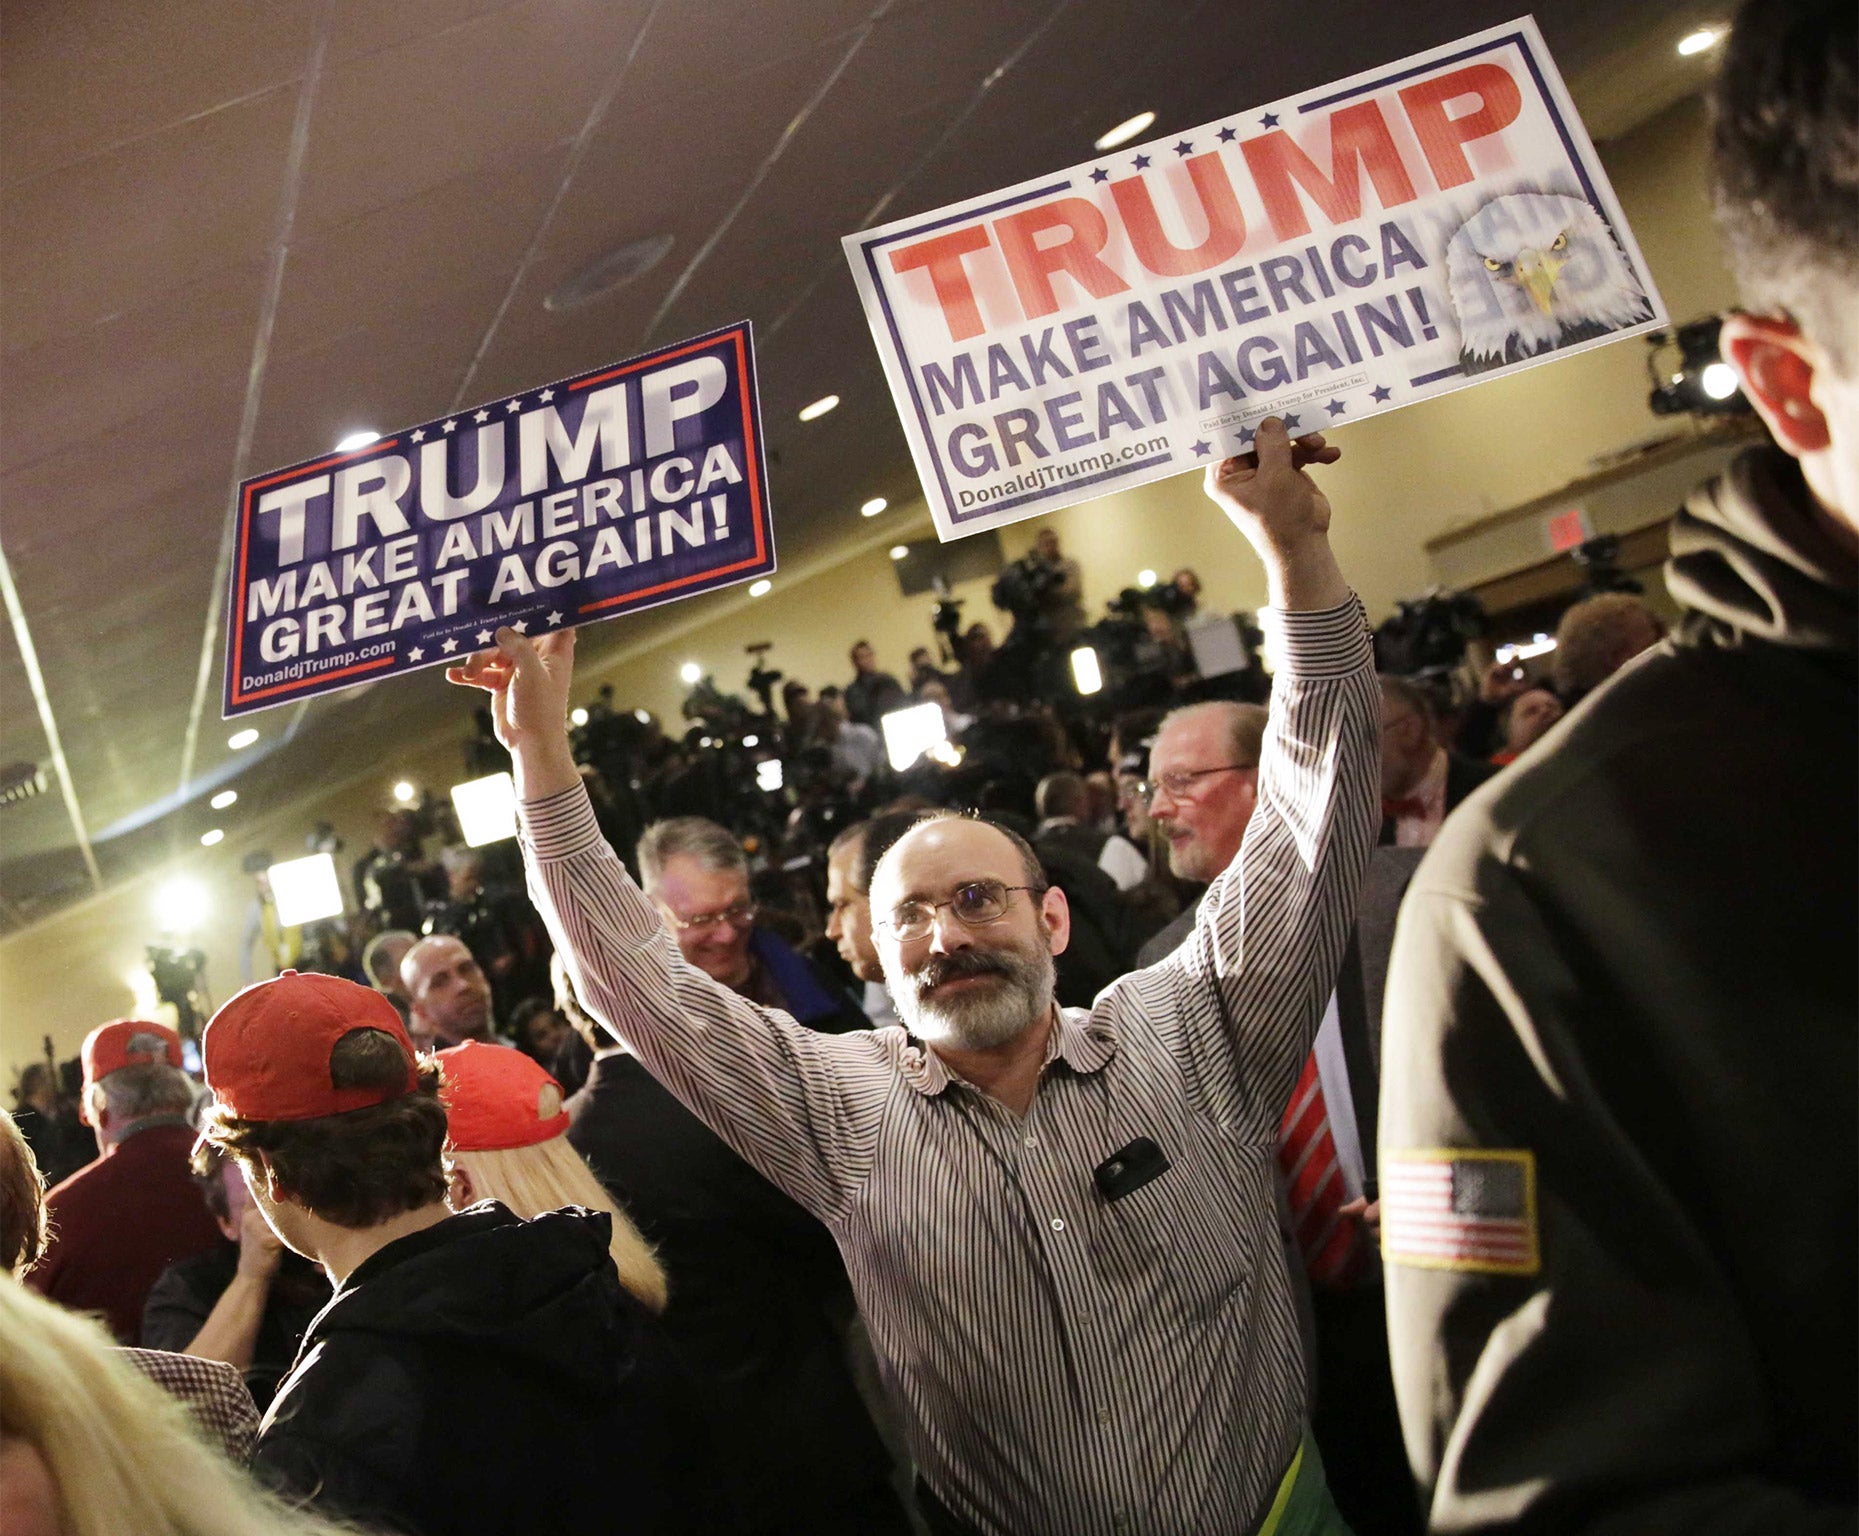 A Donald Trump supporter waves banners at the business tycoon's rally in Manchester, New Hampshire